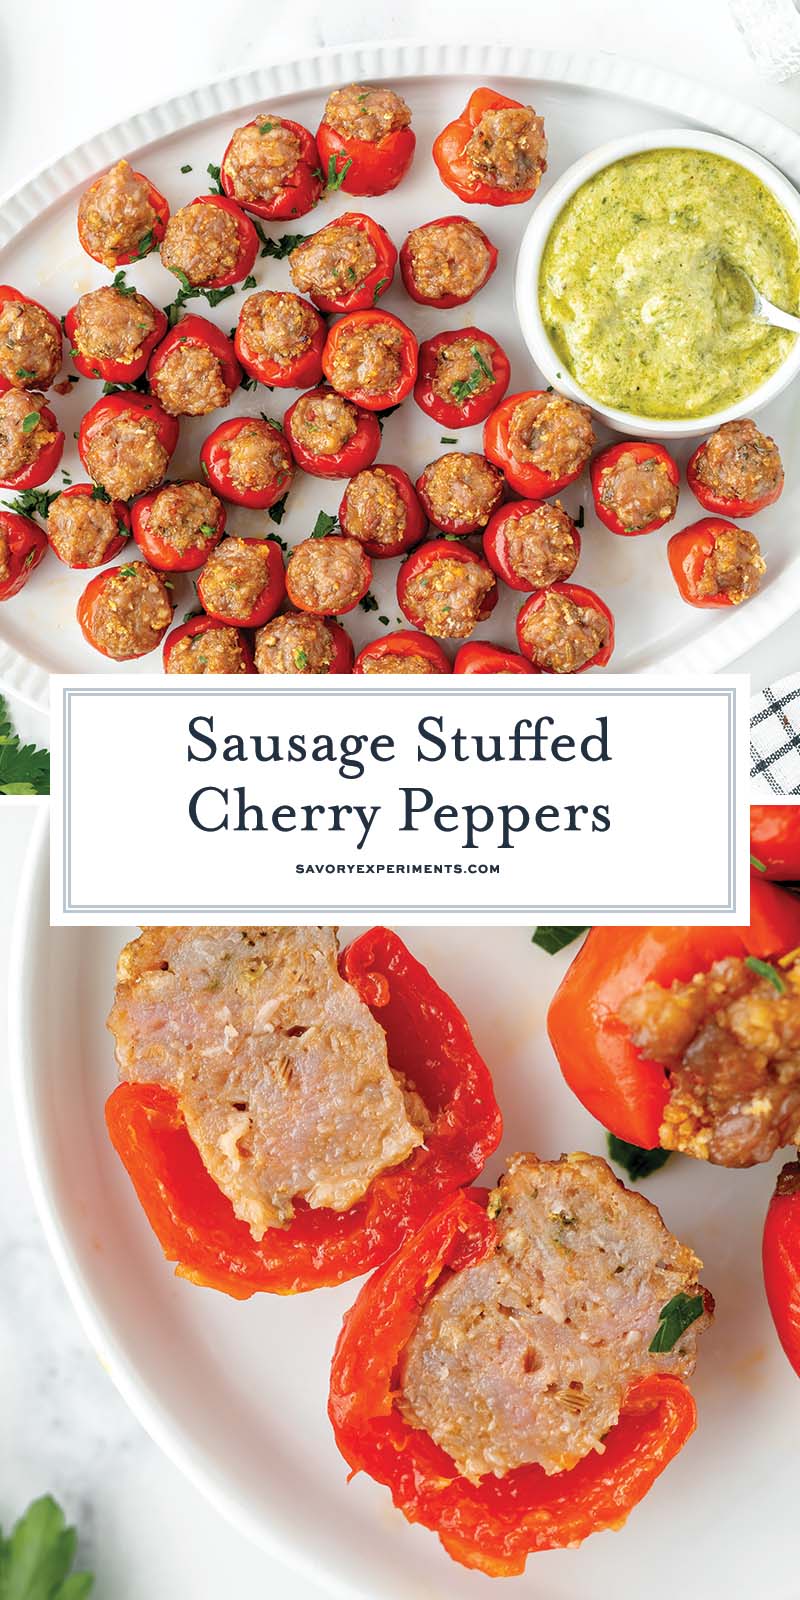 collage of stuffed cherry peppers